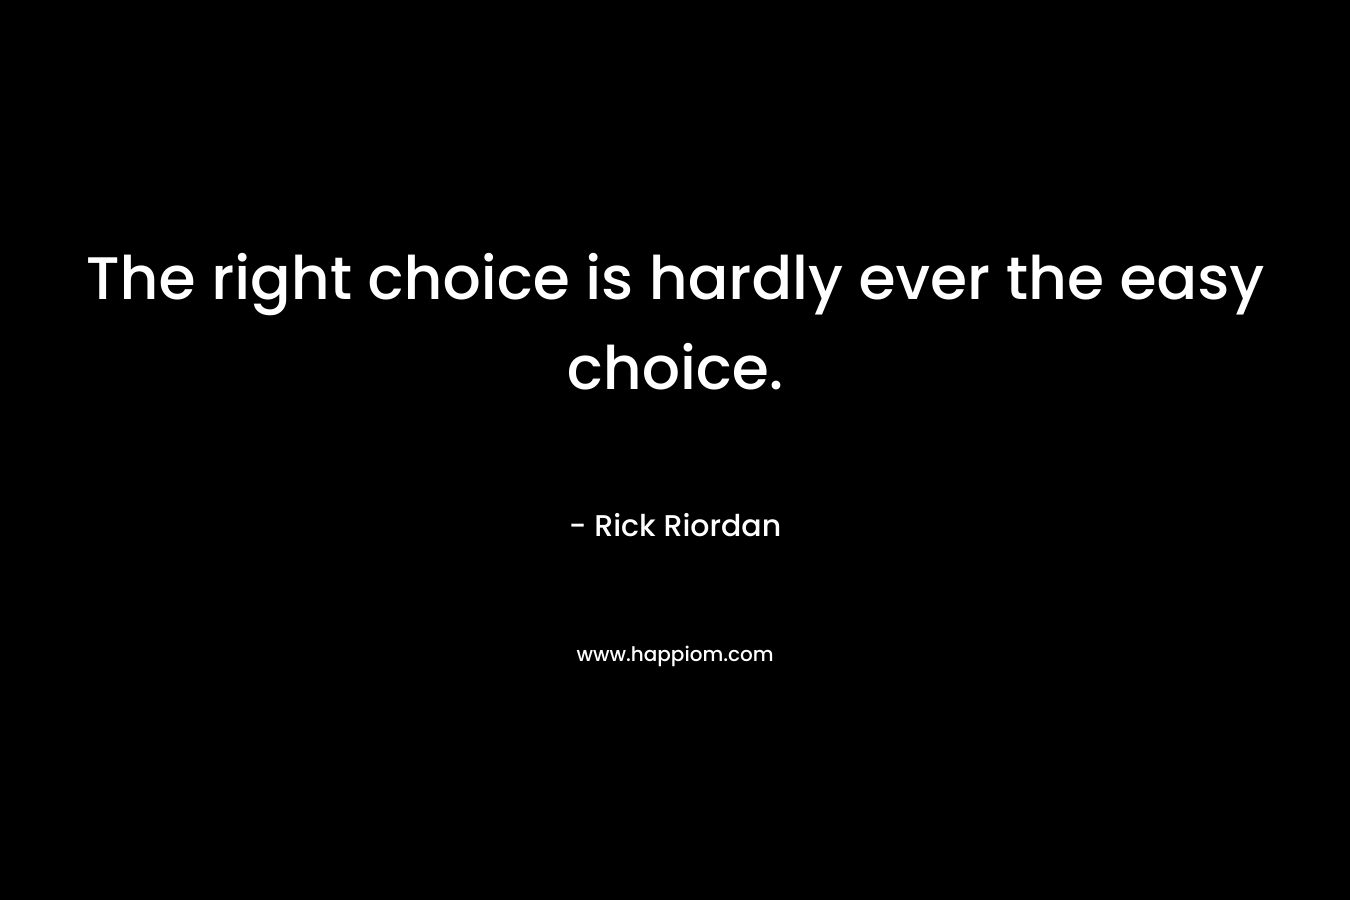 The right choice is hardly ever the easy choice.